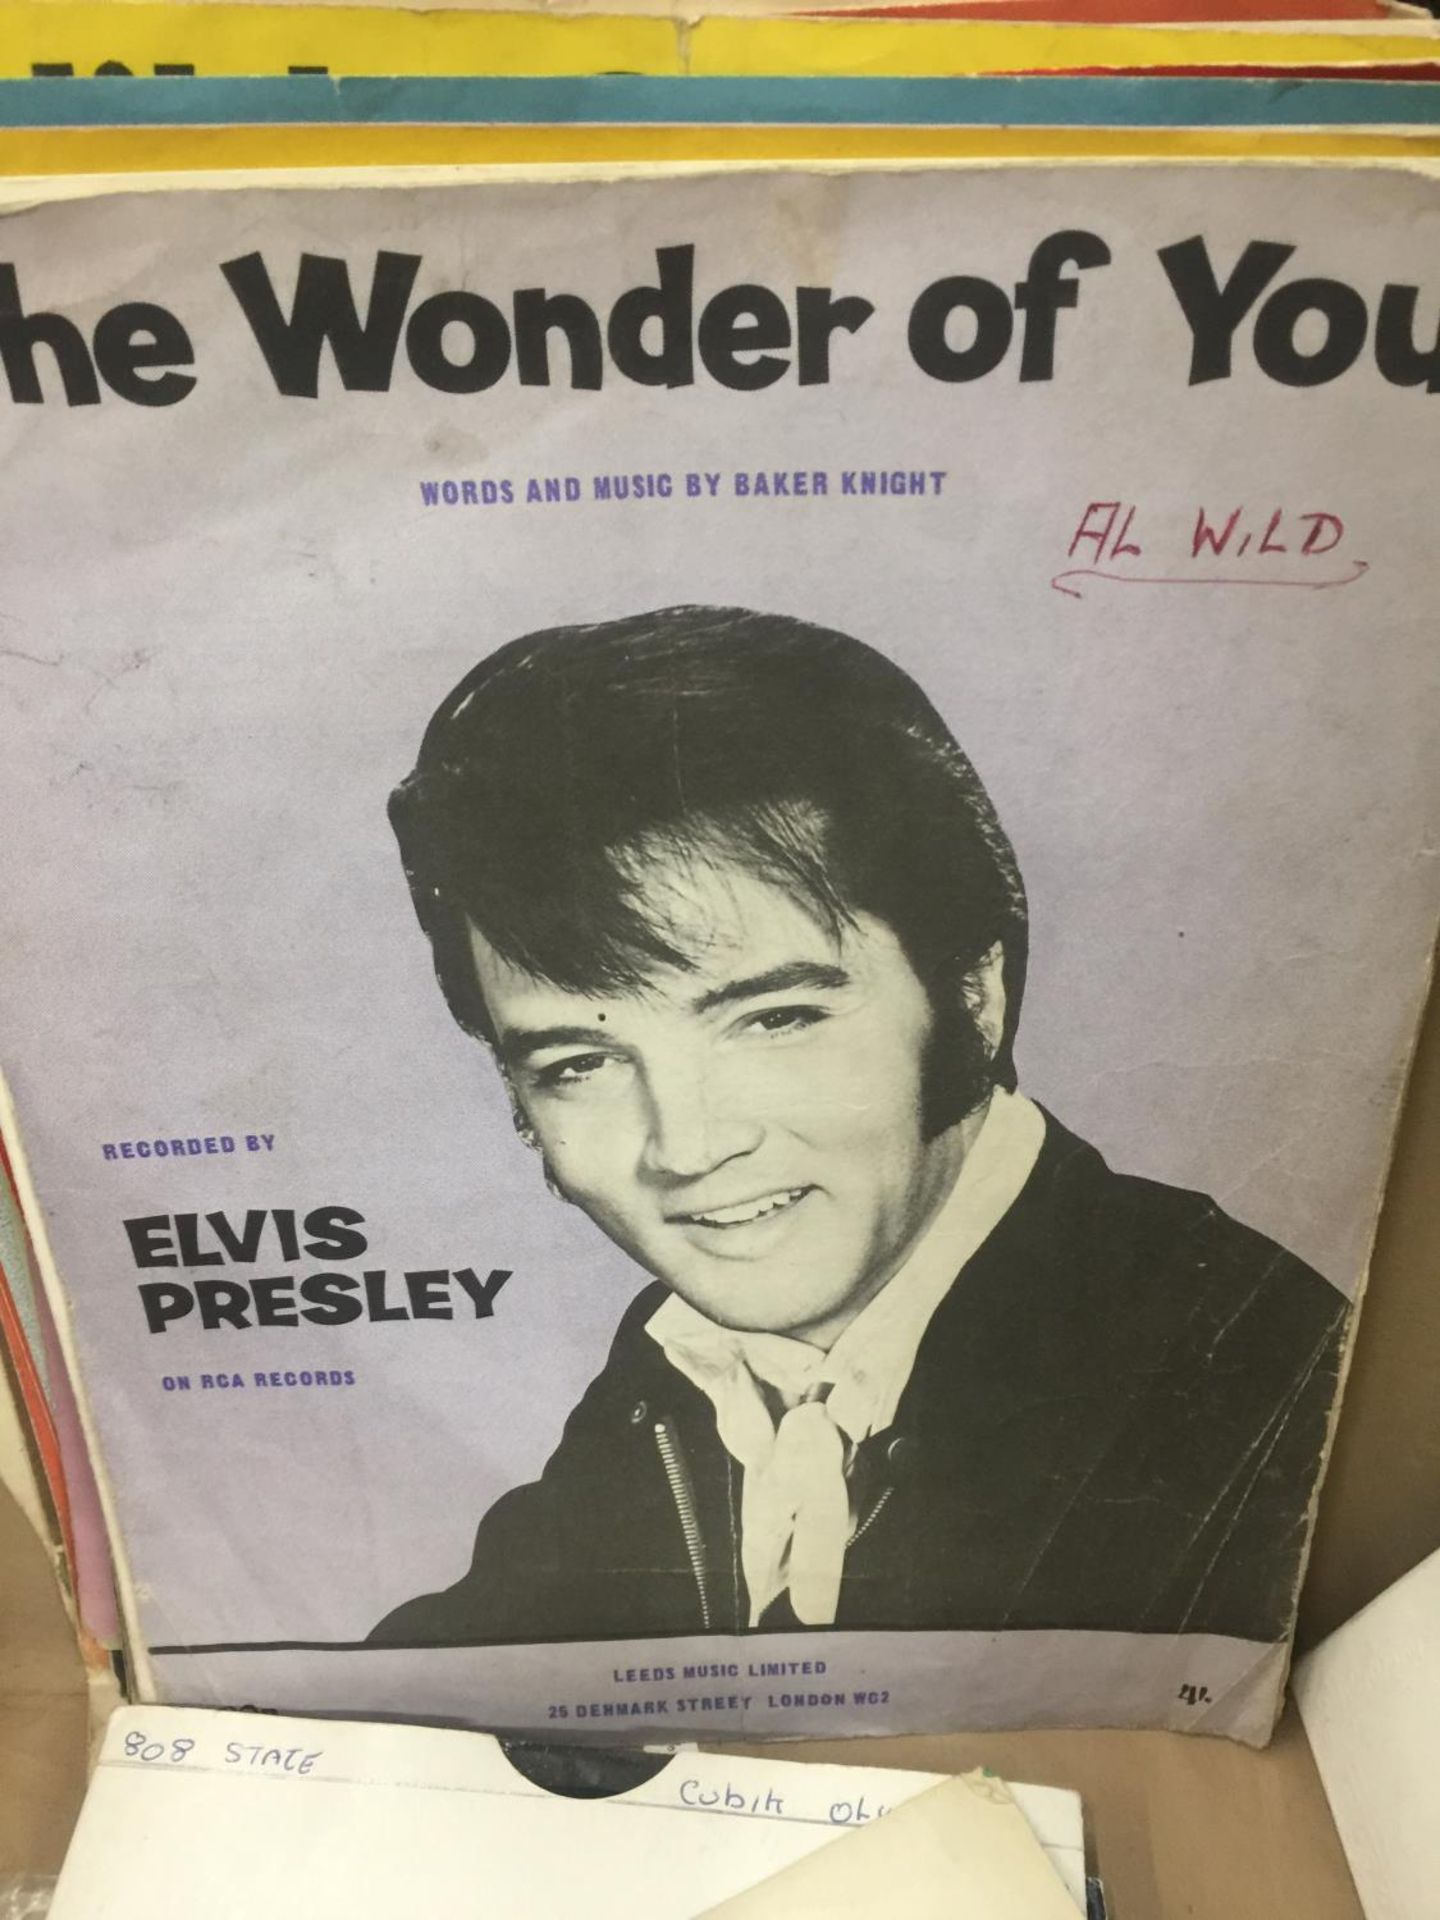 A QUANTITY OF VINTAGE SINGLE VINYL RECORDS TO INCLUDE ELVIS PRESLEY, THE EVERLY BROTHERS, DAVID - Image 4 of 6